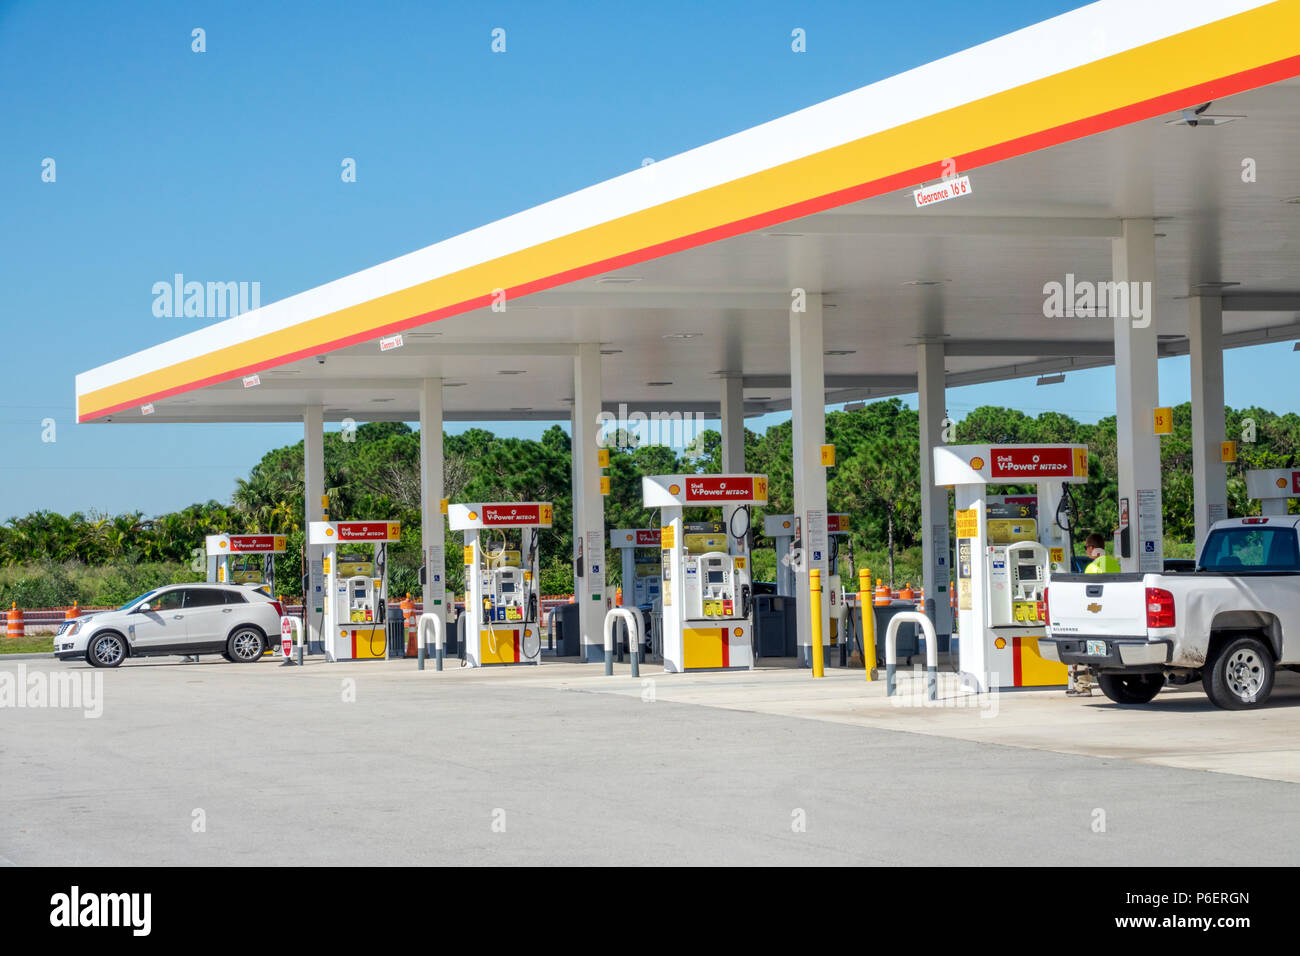 Florida,Fort Ft. Pierce,Florida Turnpike toll road,rest stop gas gasoline filling petrol station,Shell,canopy,pumps,FL171028008 Stock Photo